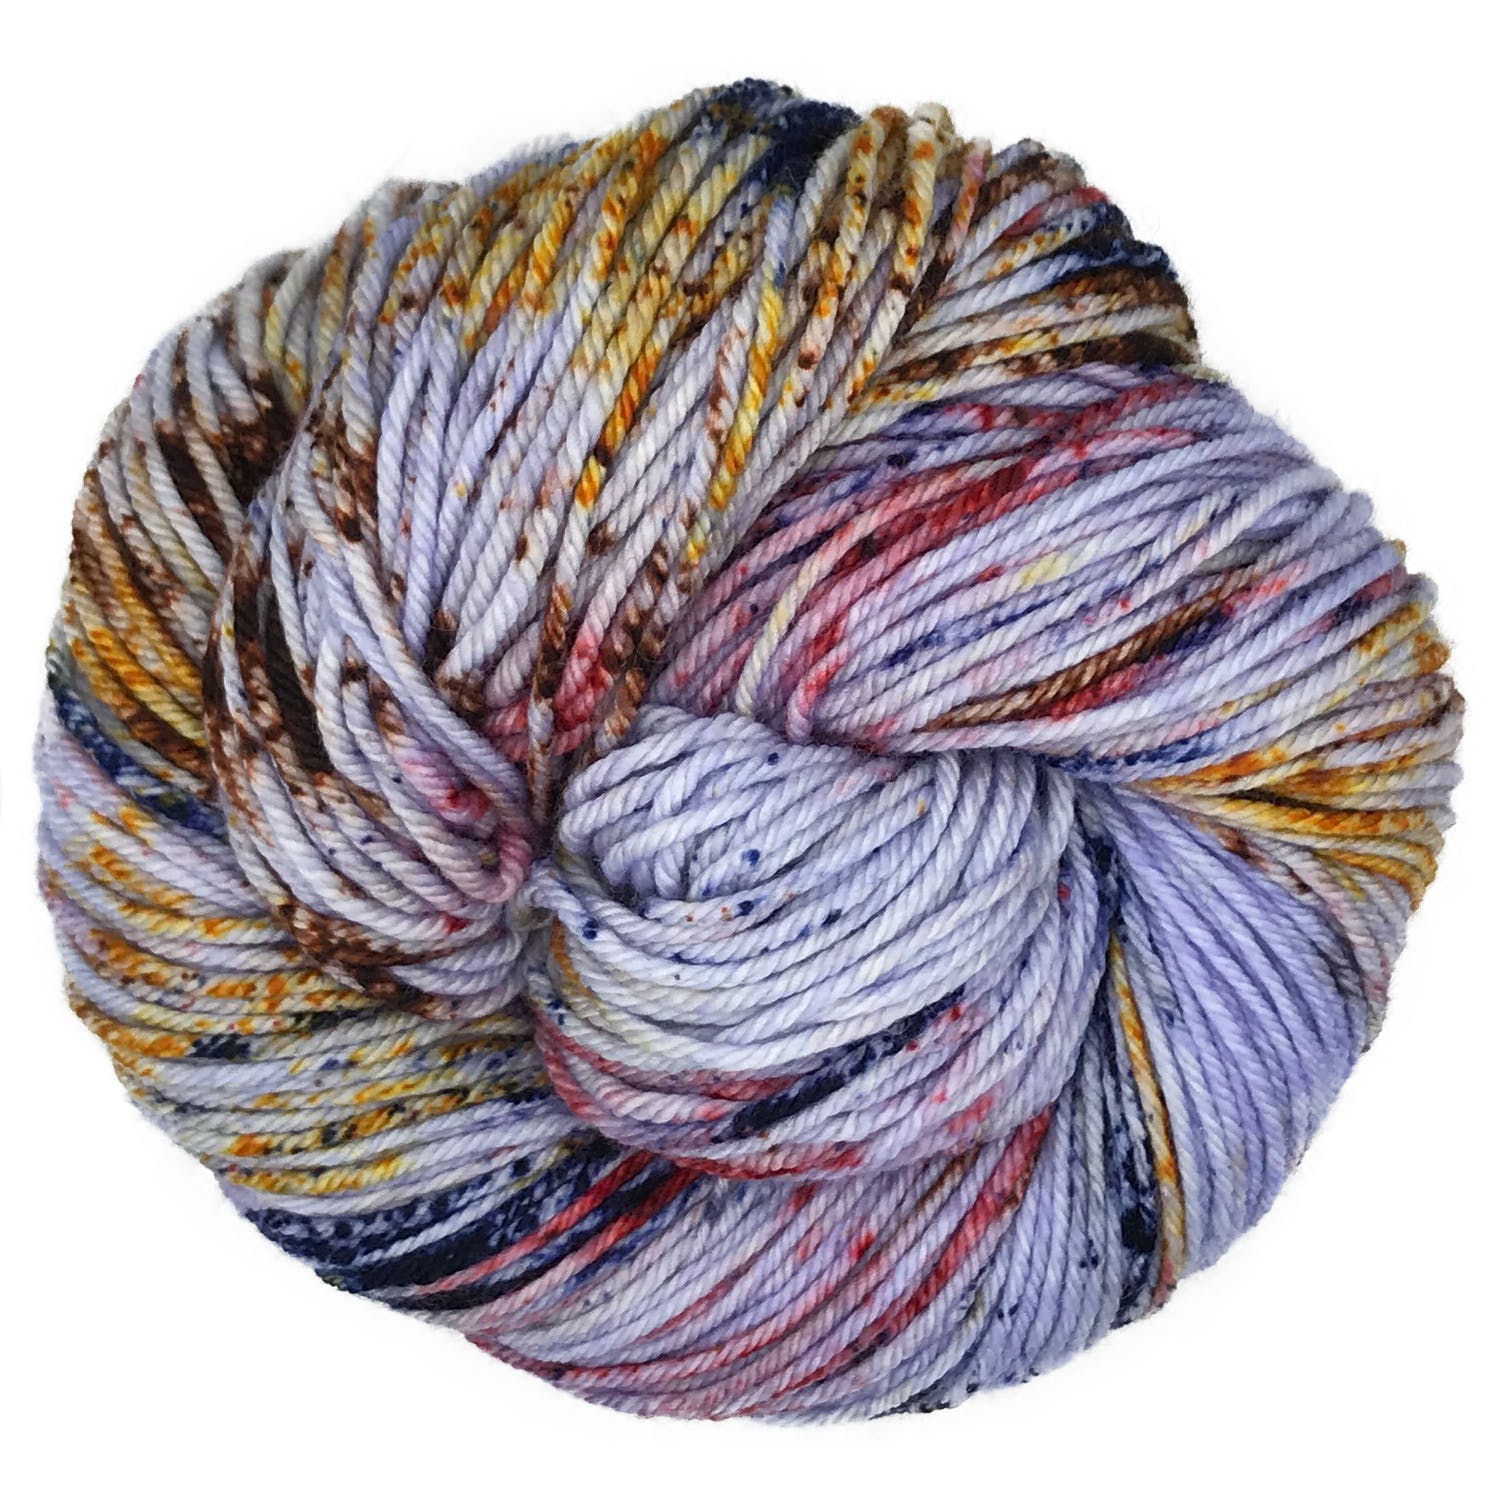 Skein of Malabrigo Rios Worsted weight yarn in color Medusa (Multi) for knitting and crocheting.